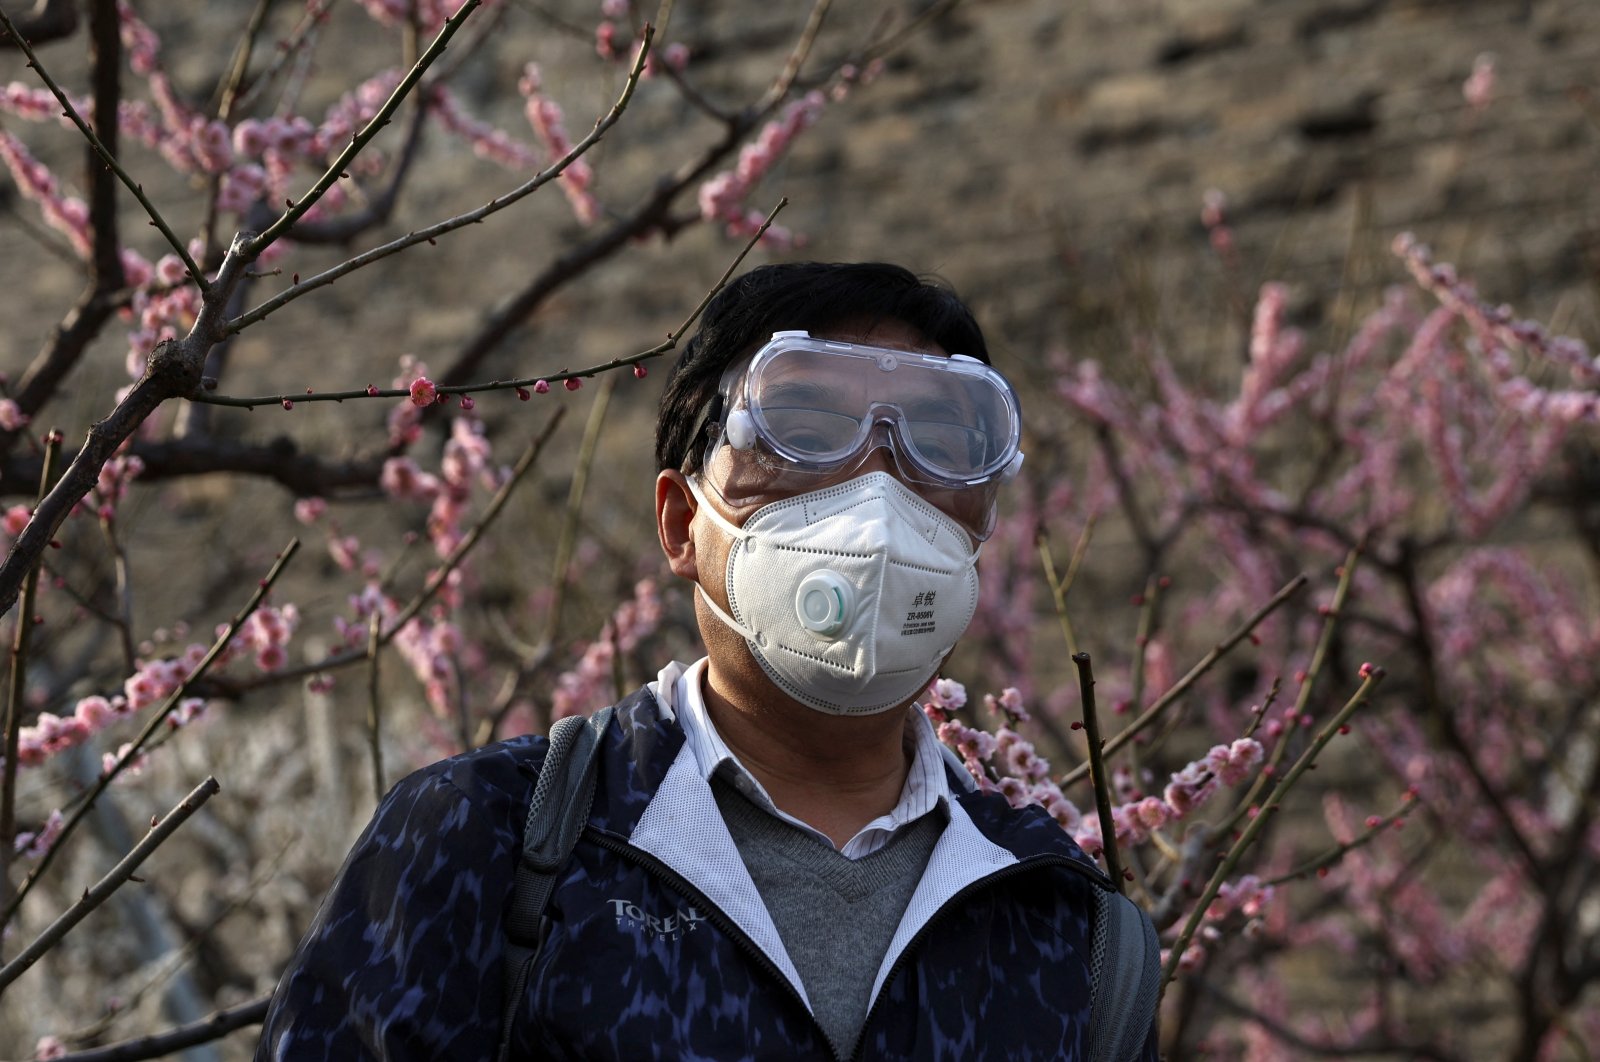 A man wearing protective glasses and a face mask looks on under blooming plum blossoms in Beijing, China, March 28, 2022. (Reuters Photo)